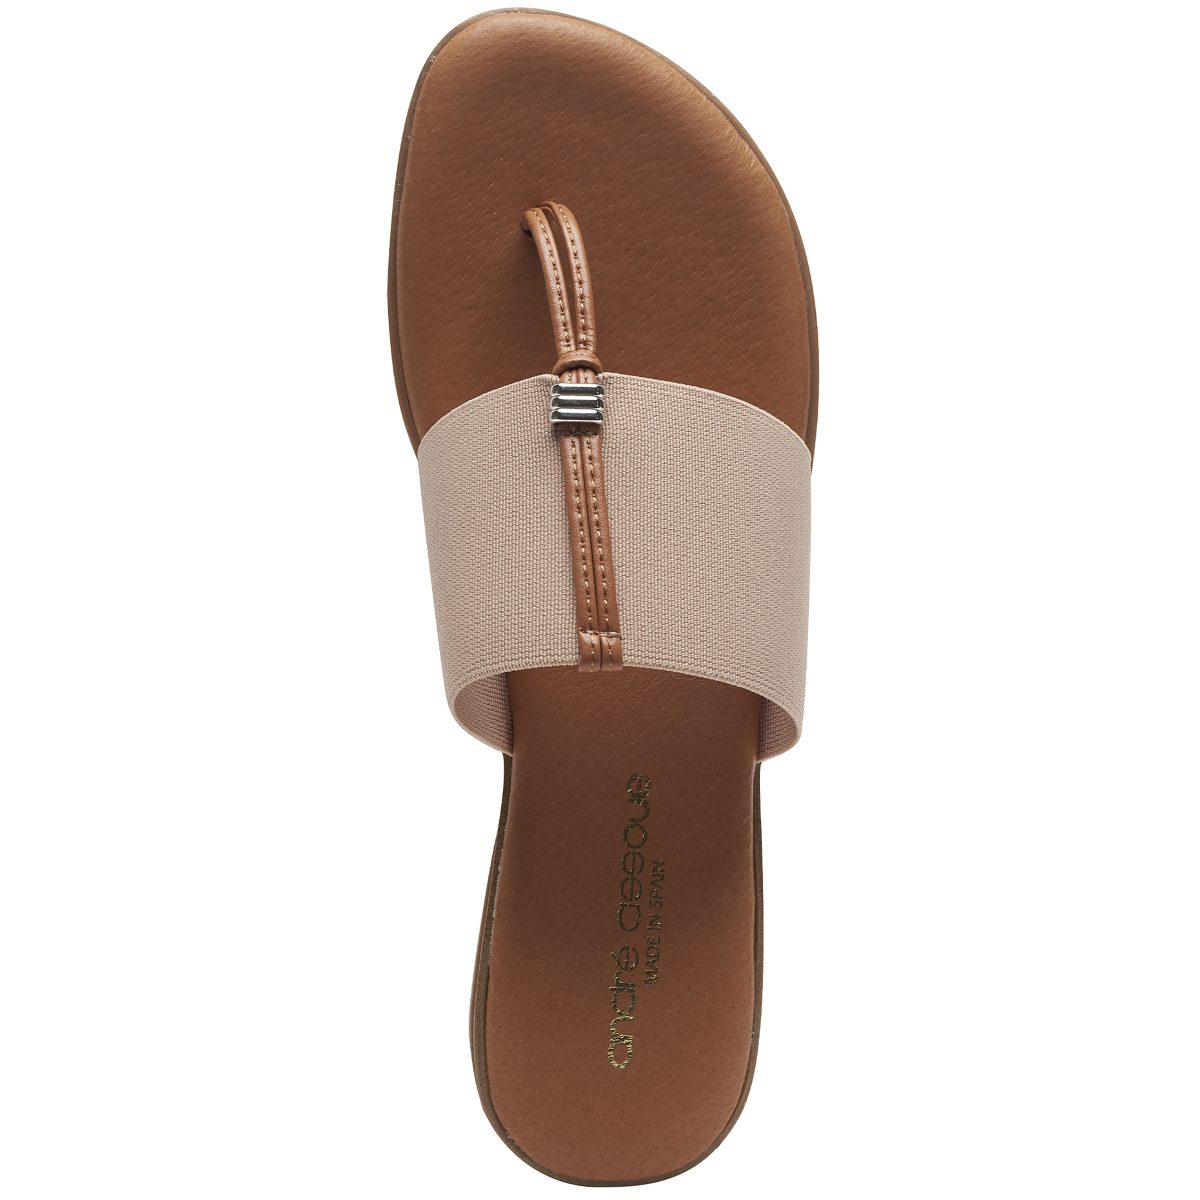 Andre Assous Nice thong style sandal with leather padded footbed and wide elastic band| Ooh! Ooh! Shoes woman's clothing and shoe boutique naples, charleston and mashpee